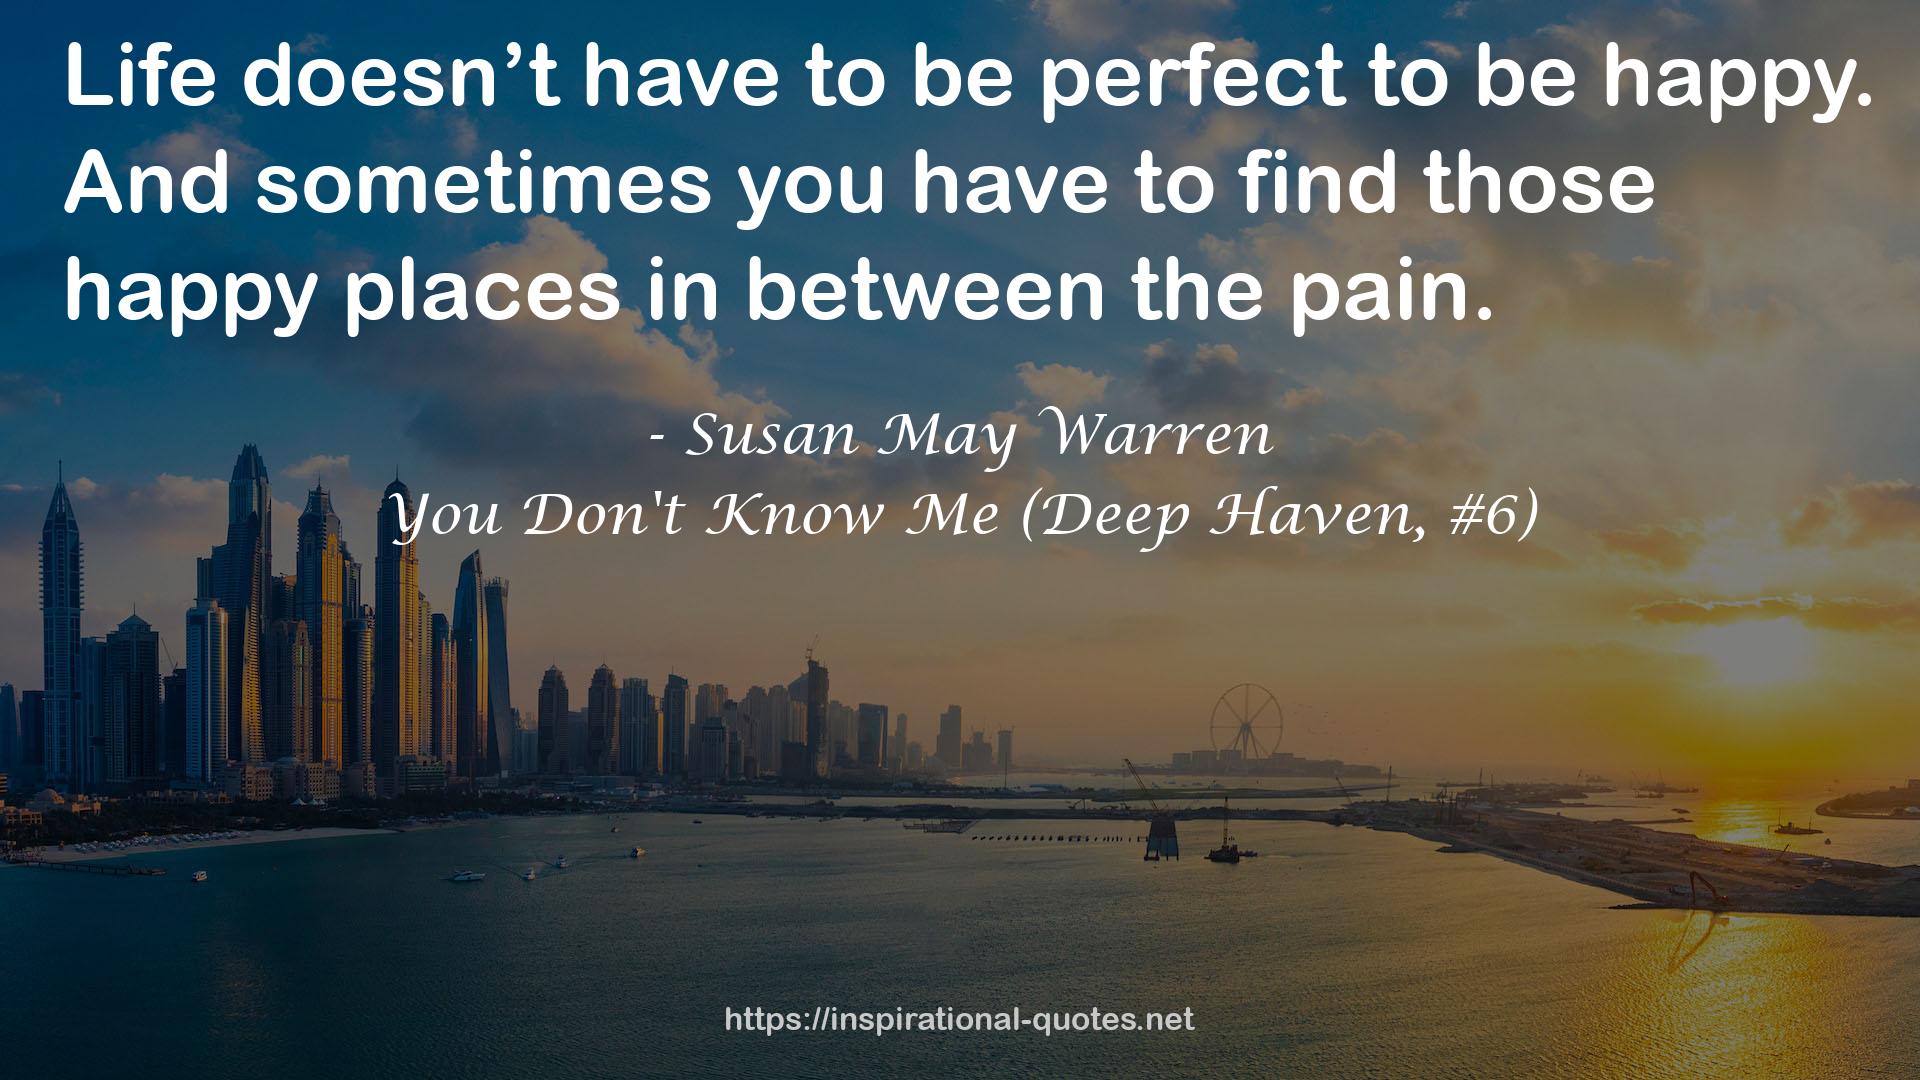 You Don't Know Me (Deep Haven, #6) QUOTES